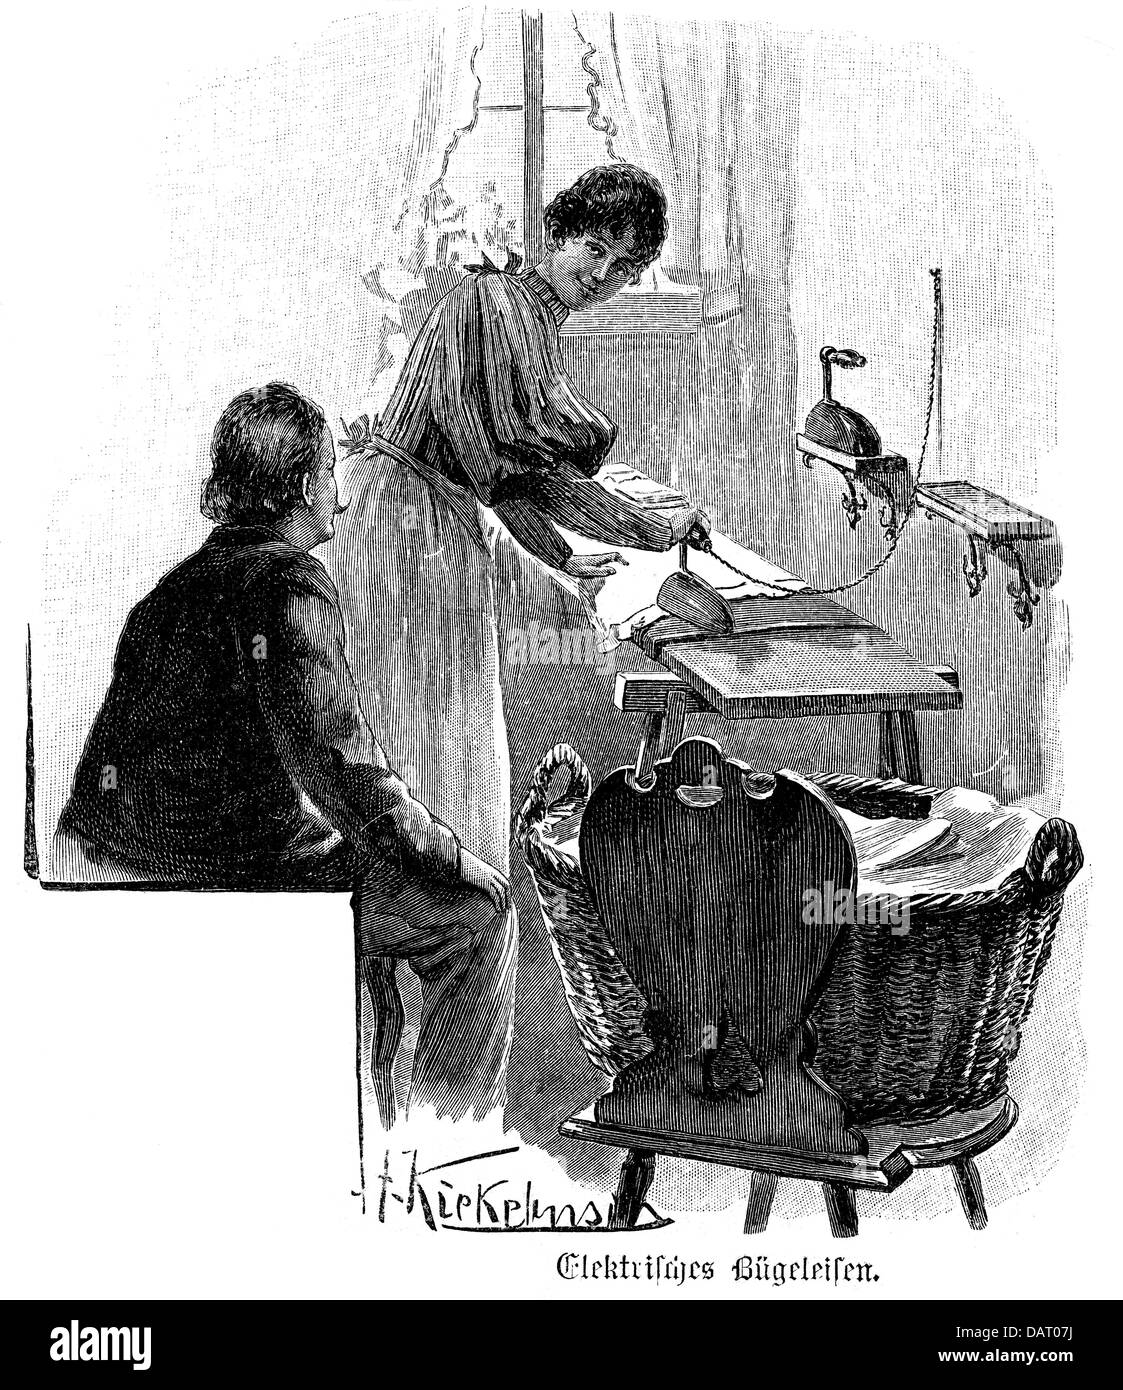 household, ironing, electric iron, after drawing by A.Kiekebusch, wood engraving, 1896, Additional-Rights-Clearences-Not Available Stock Photo